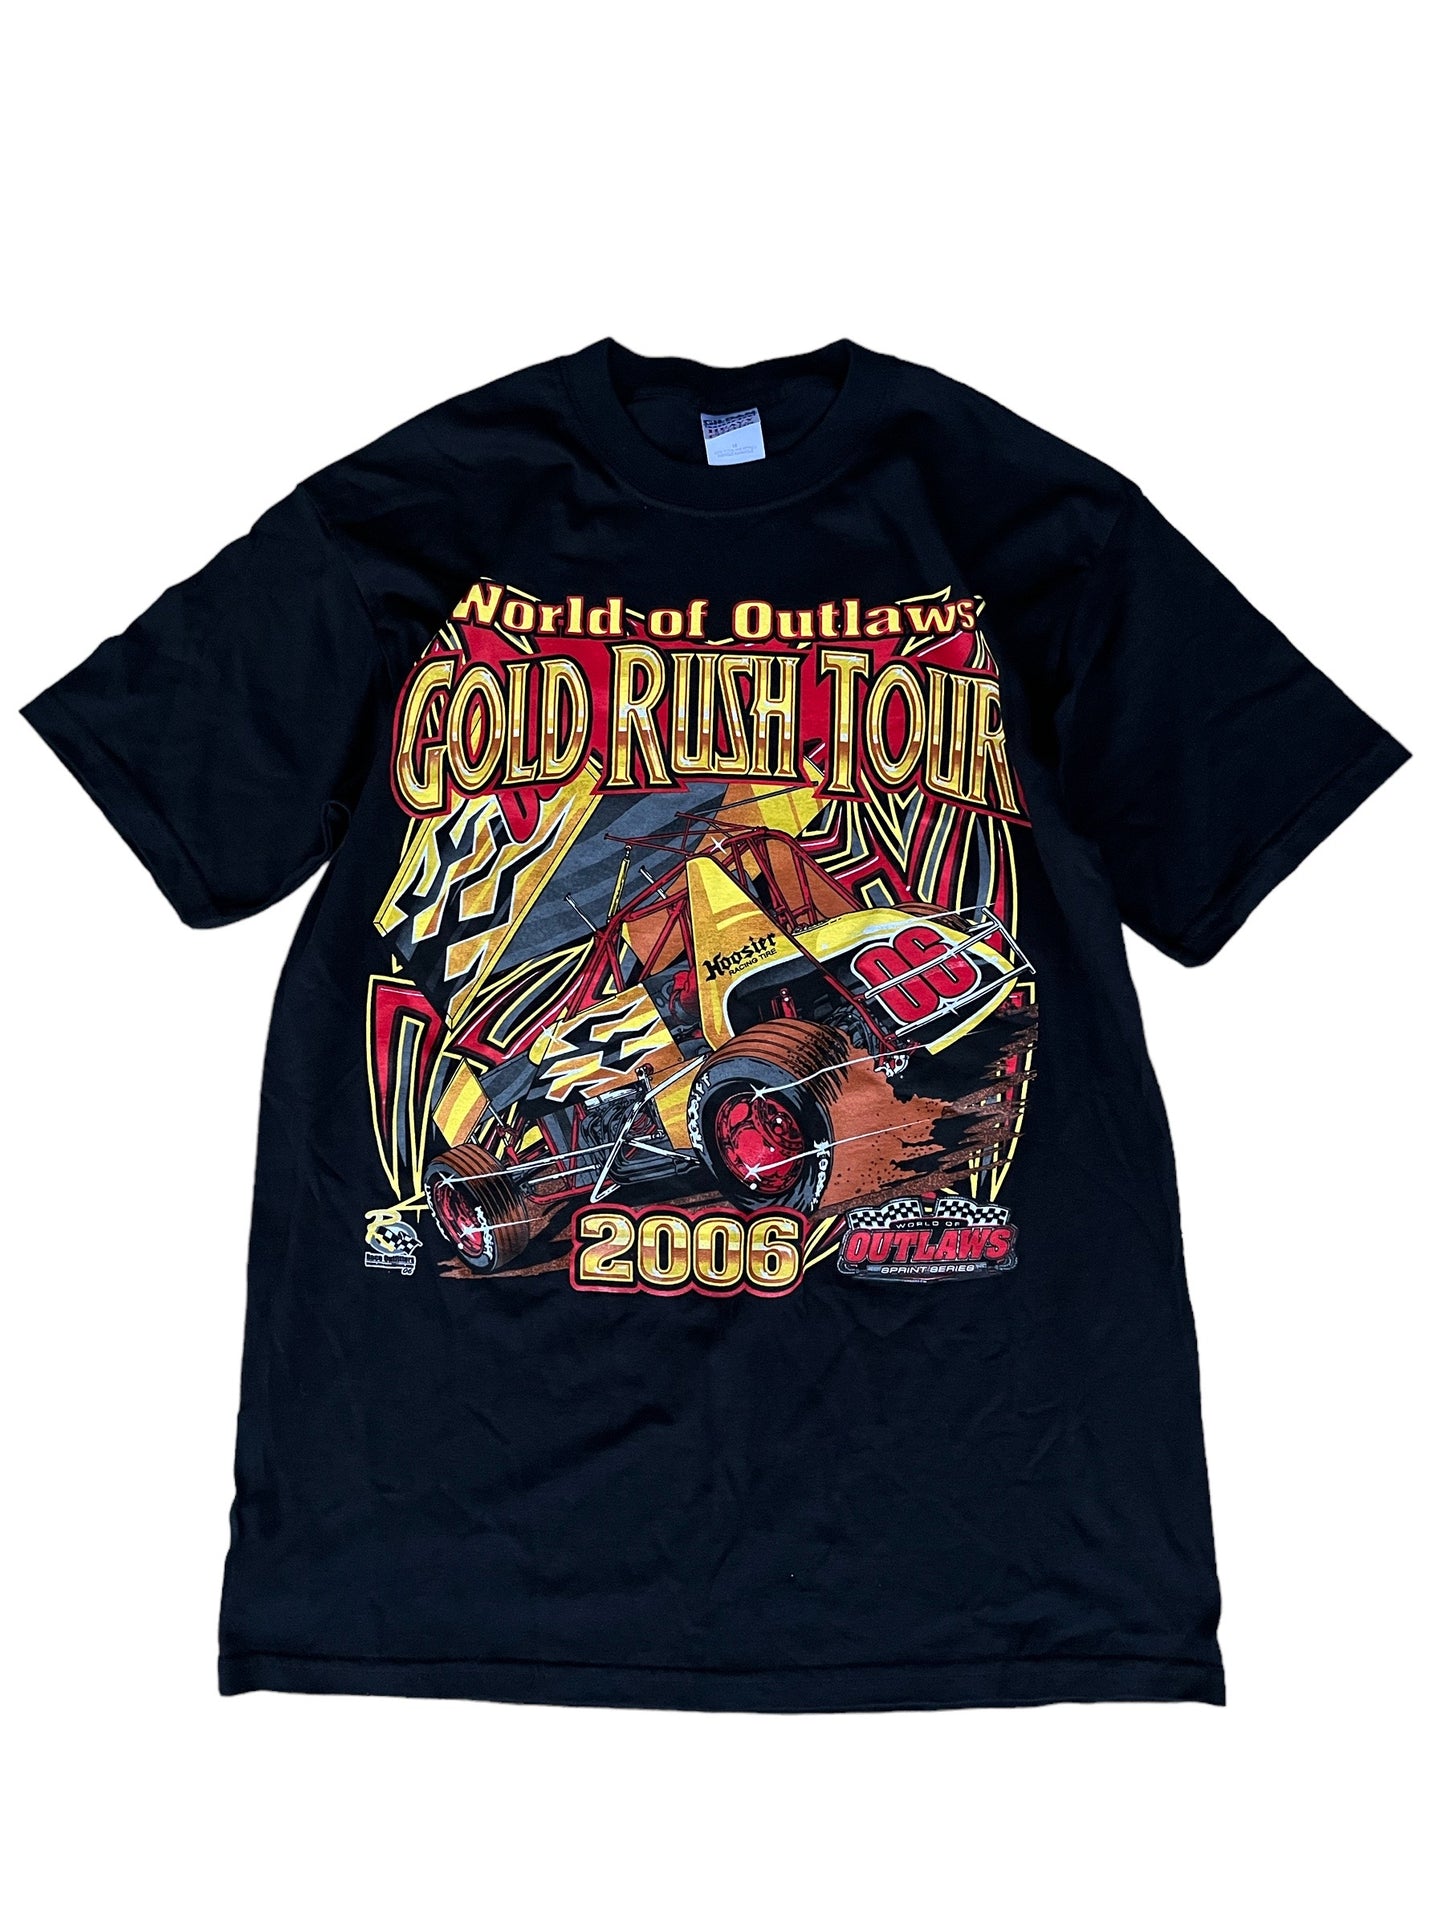 Vintage Y2k "World Of Outlaws" Tee